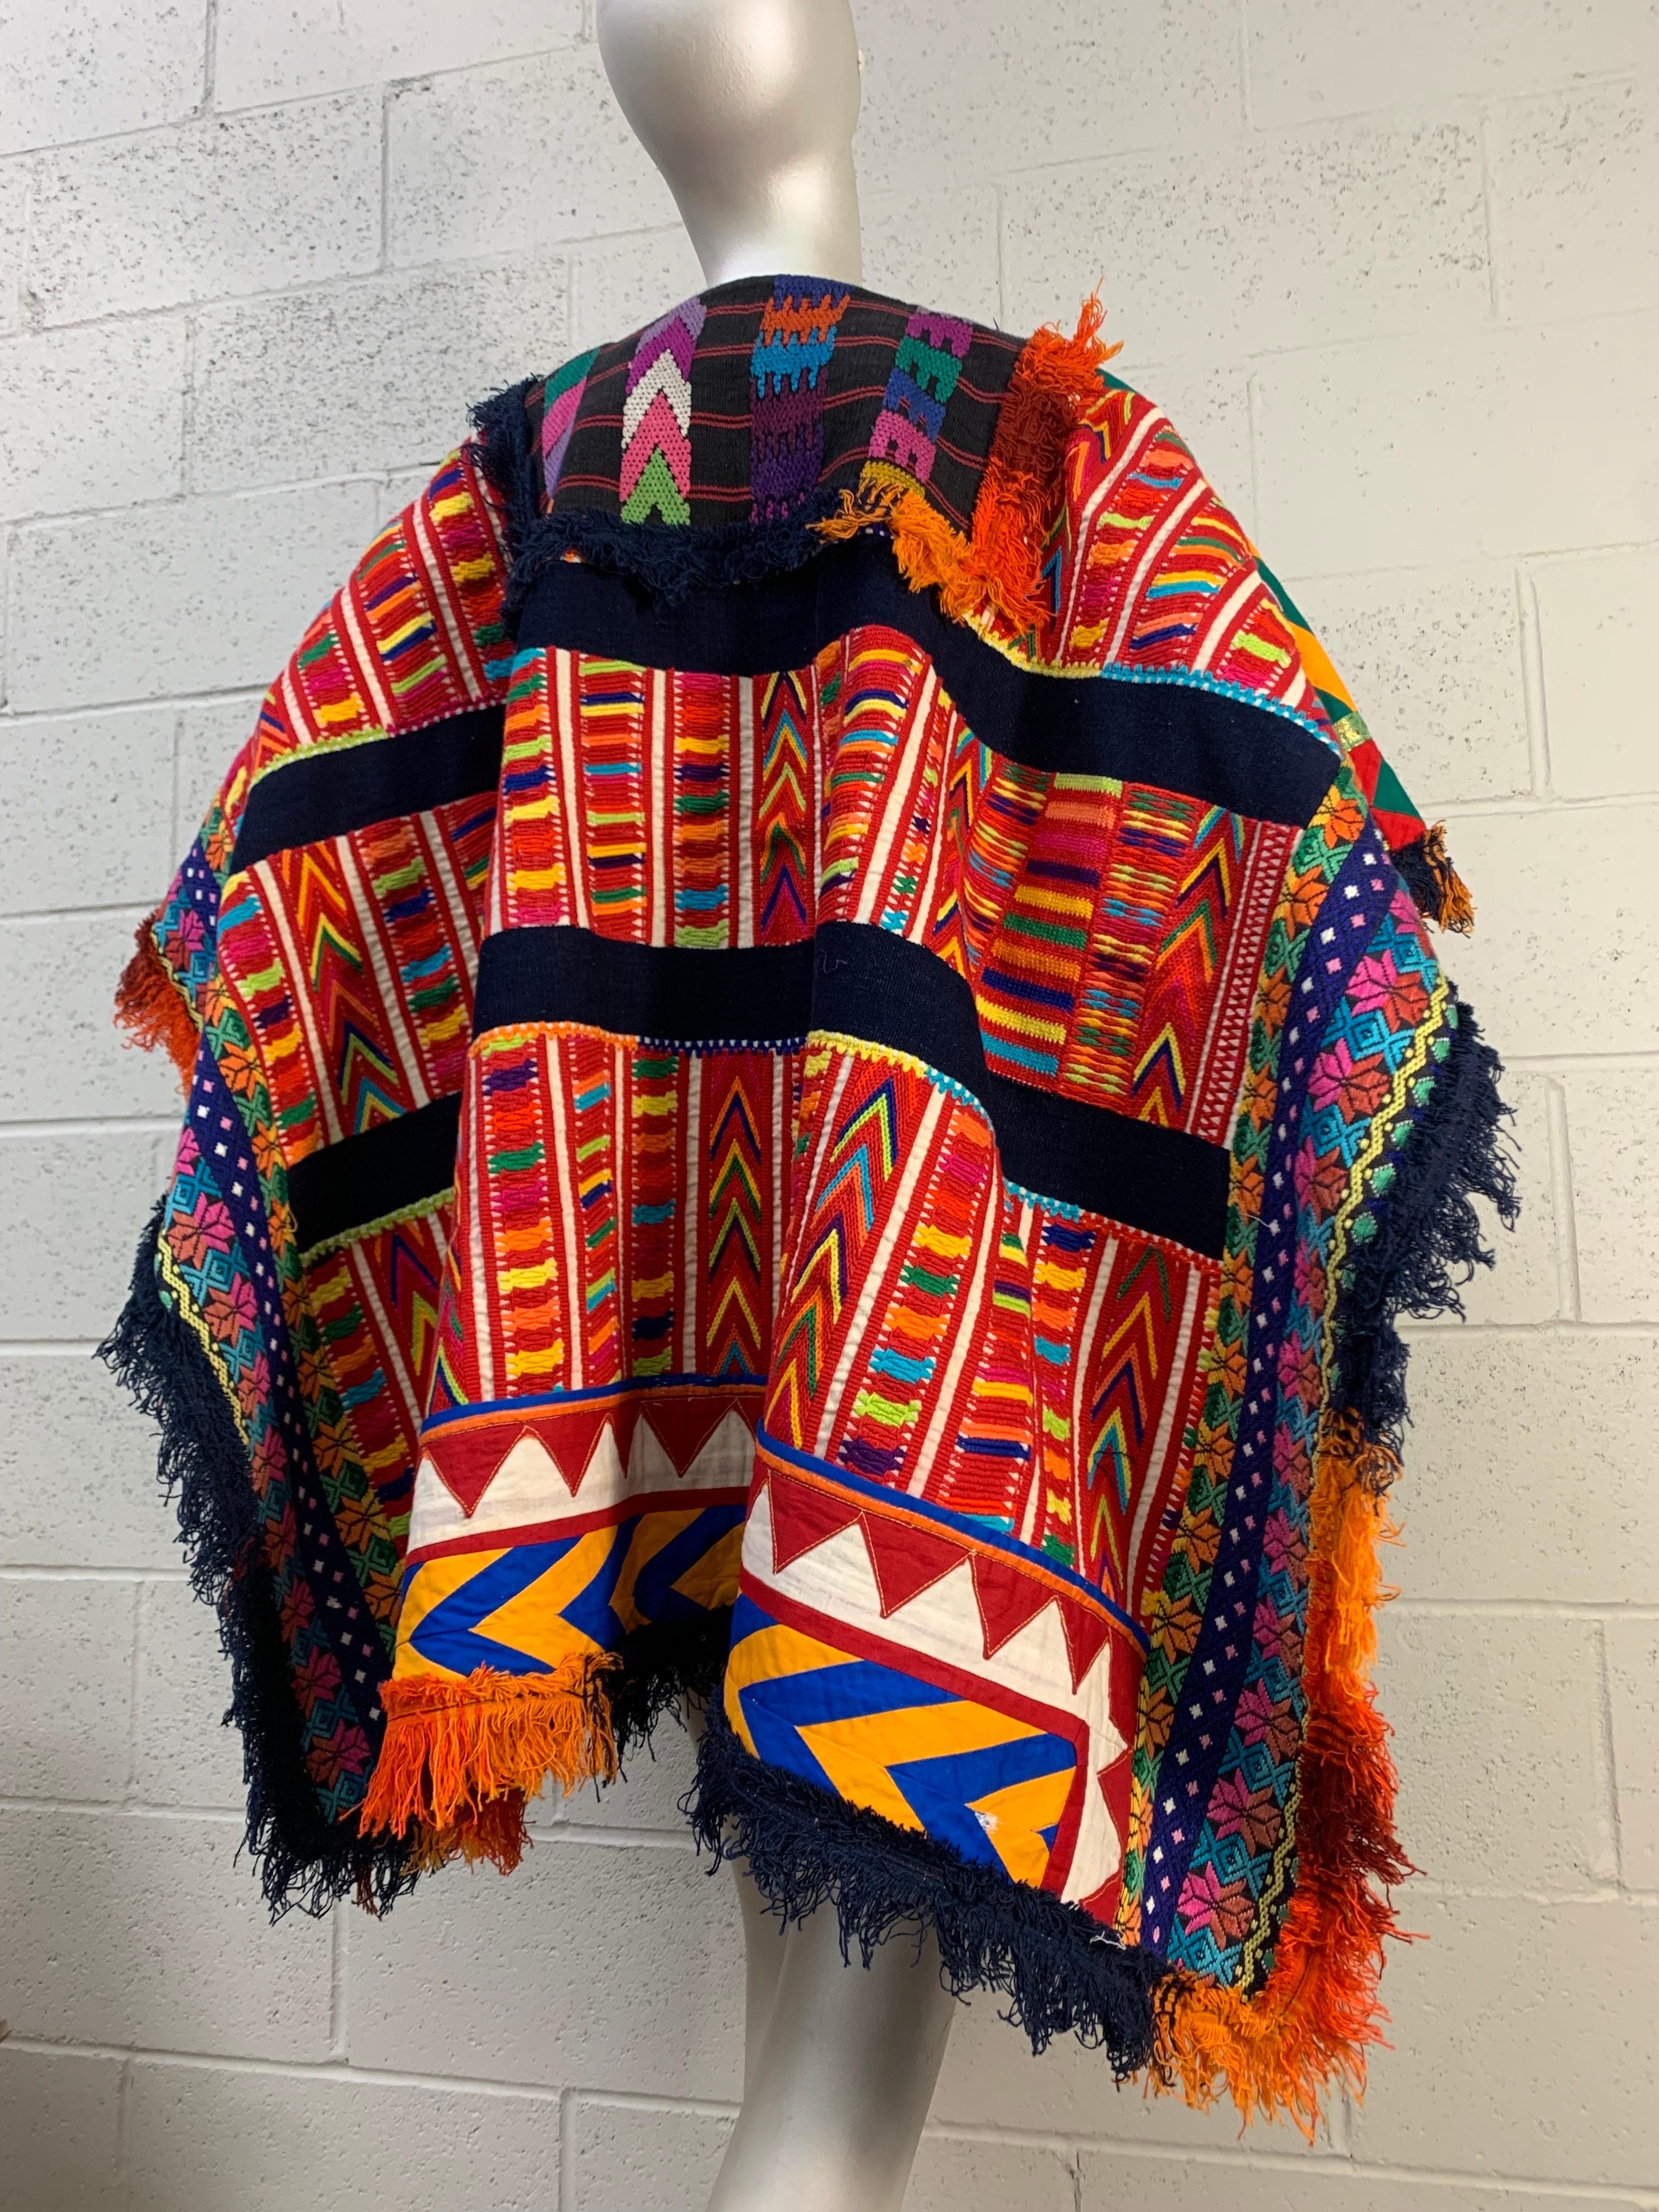 Torso Creations Art-To-Wear Woven & Embroidered Sarape  Poncho in Vivid Colors In Excellent Condition For Sale In Gresham, OR